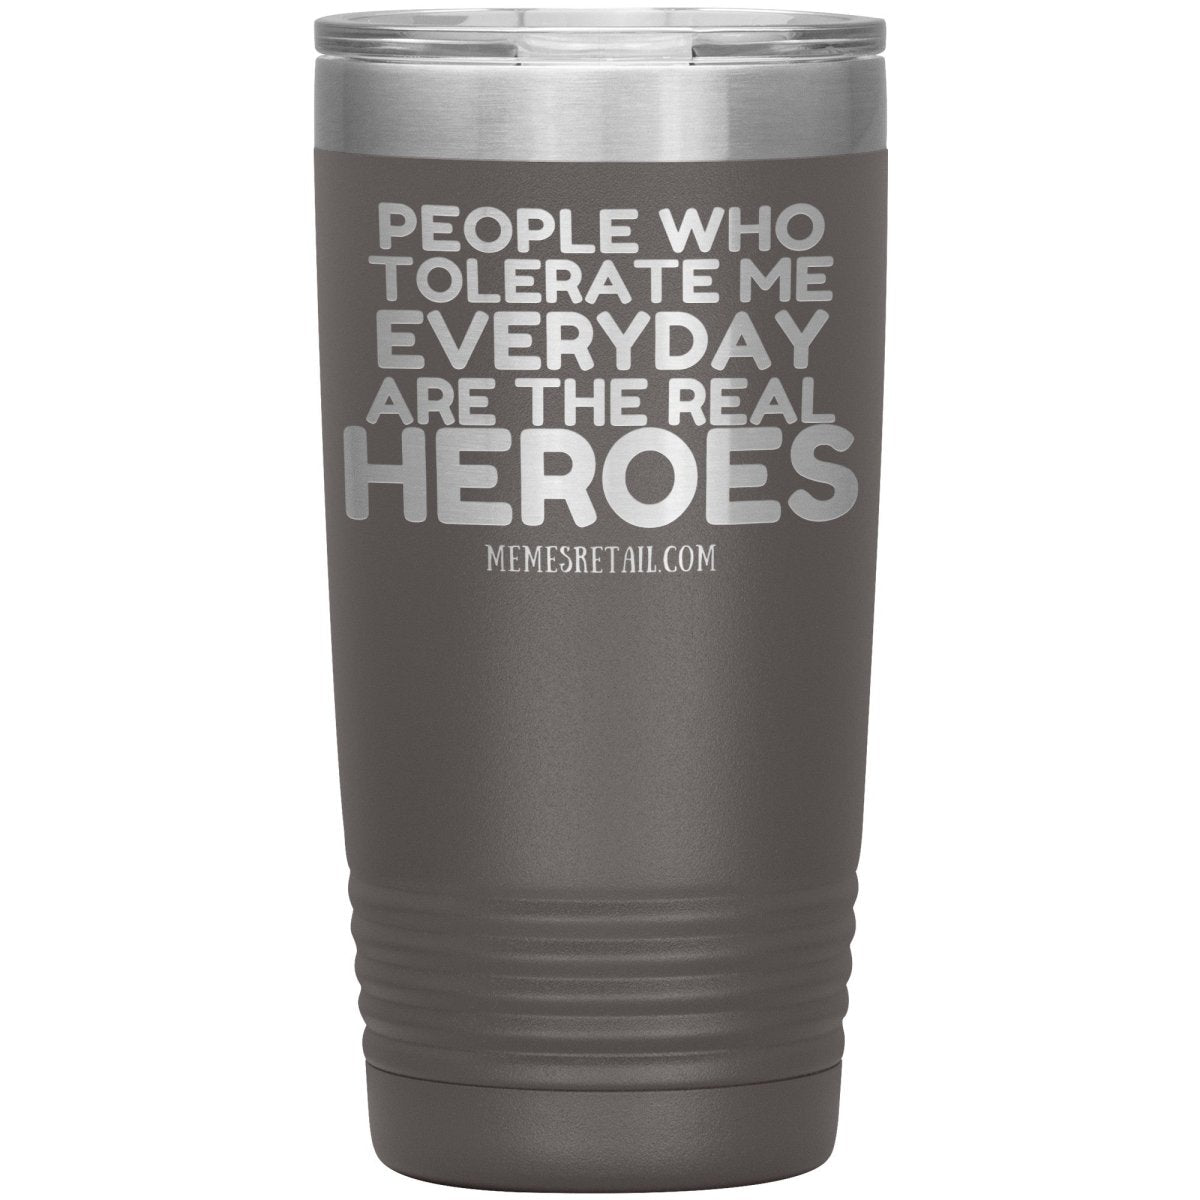 People Who Tolerate Me Everyday Are The Real Heroes Tumblers, 20oz Insulated Tumbler / Pewter - MemesRetail.com